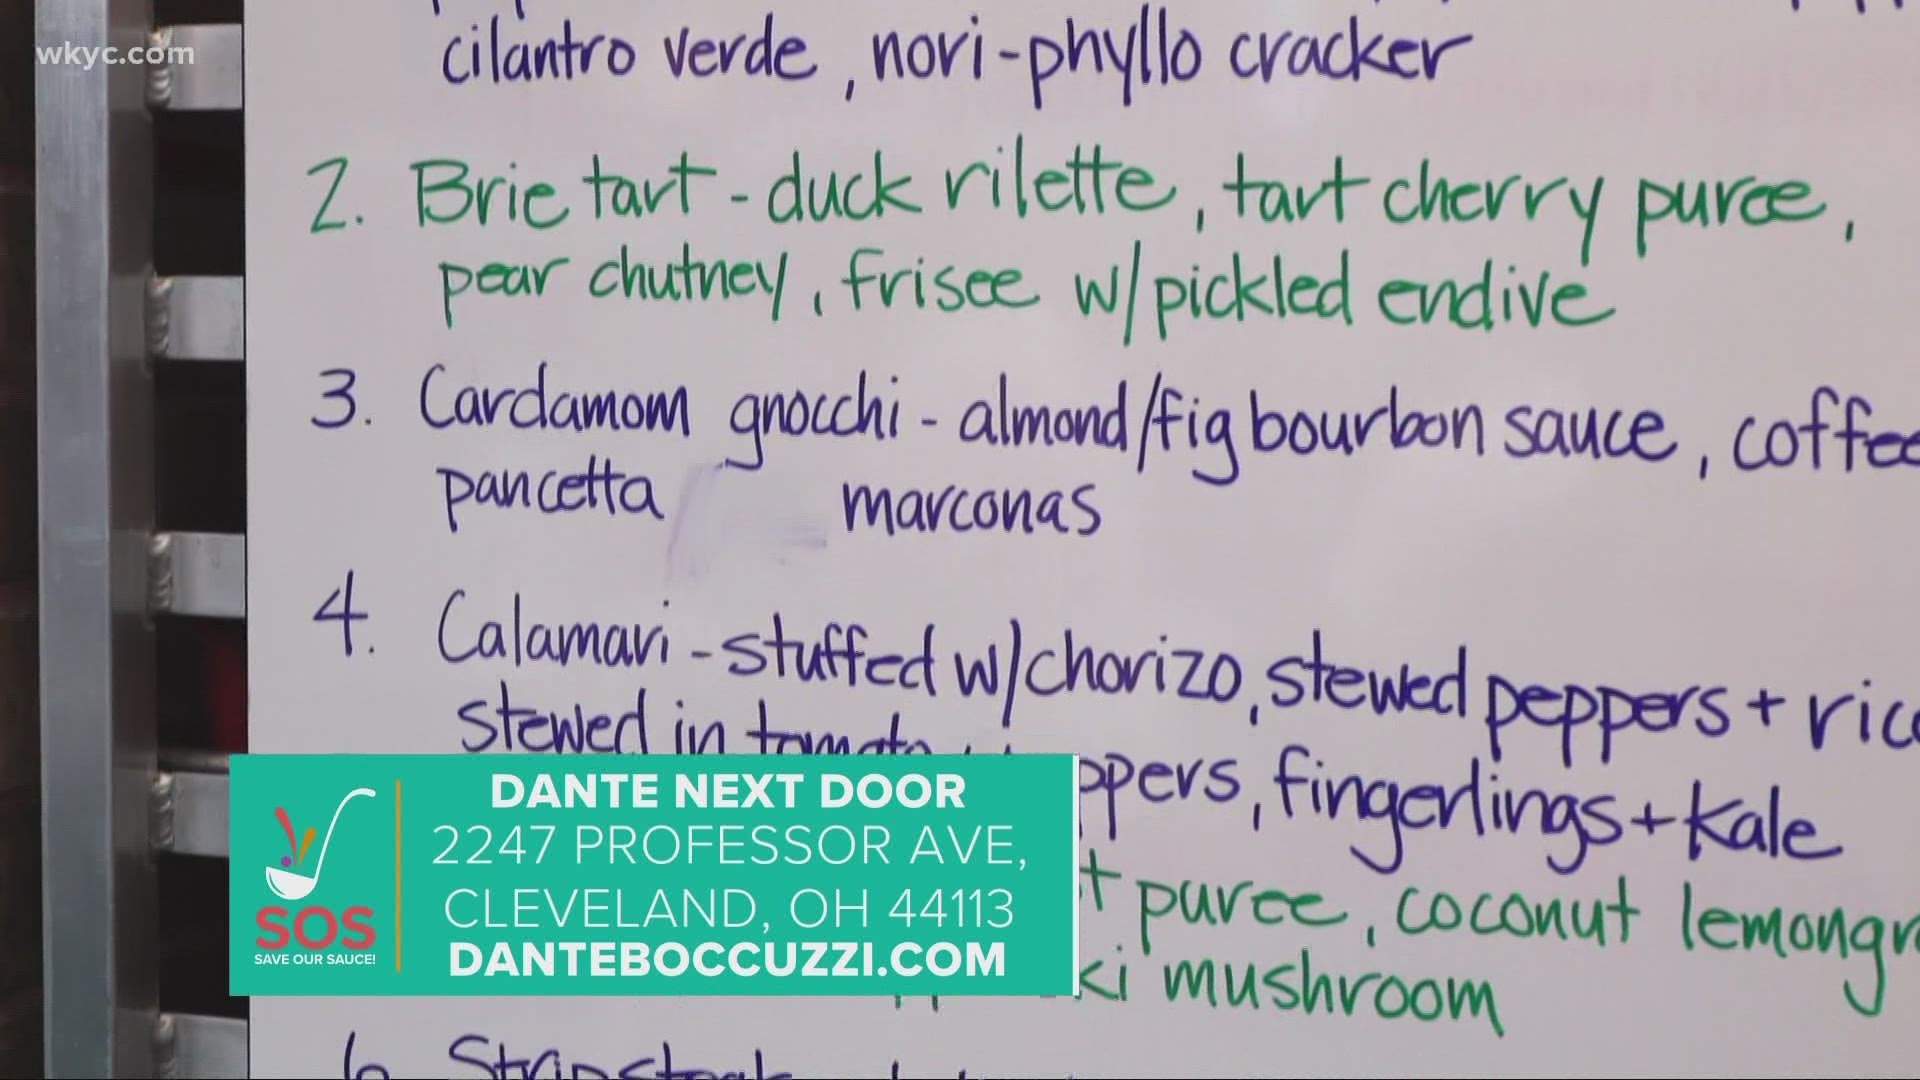 A versatile menu! Food for everyone! What's not to love? Dante Next Door is one restaurant you wan to check out.